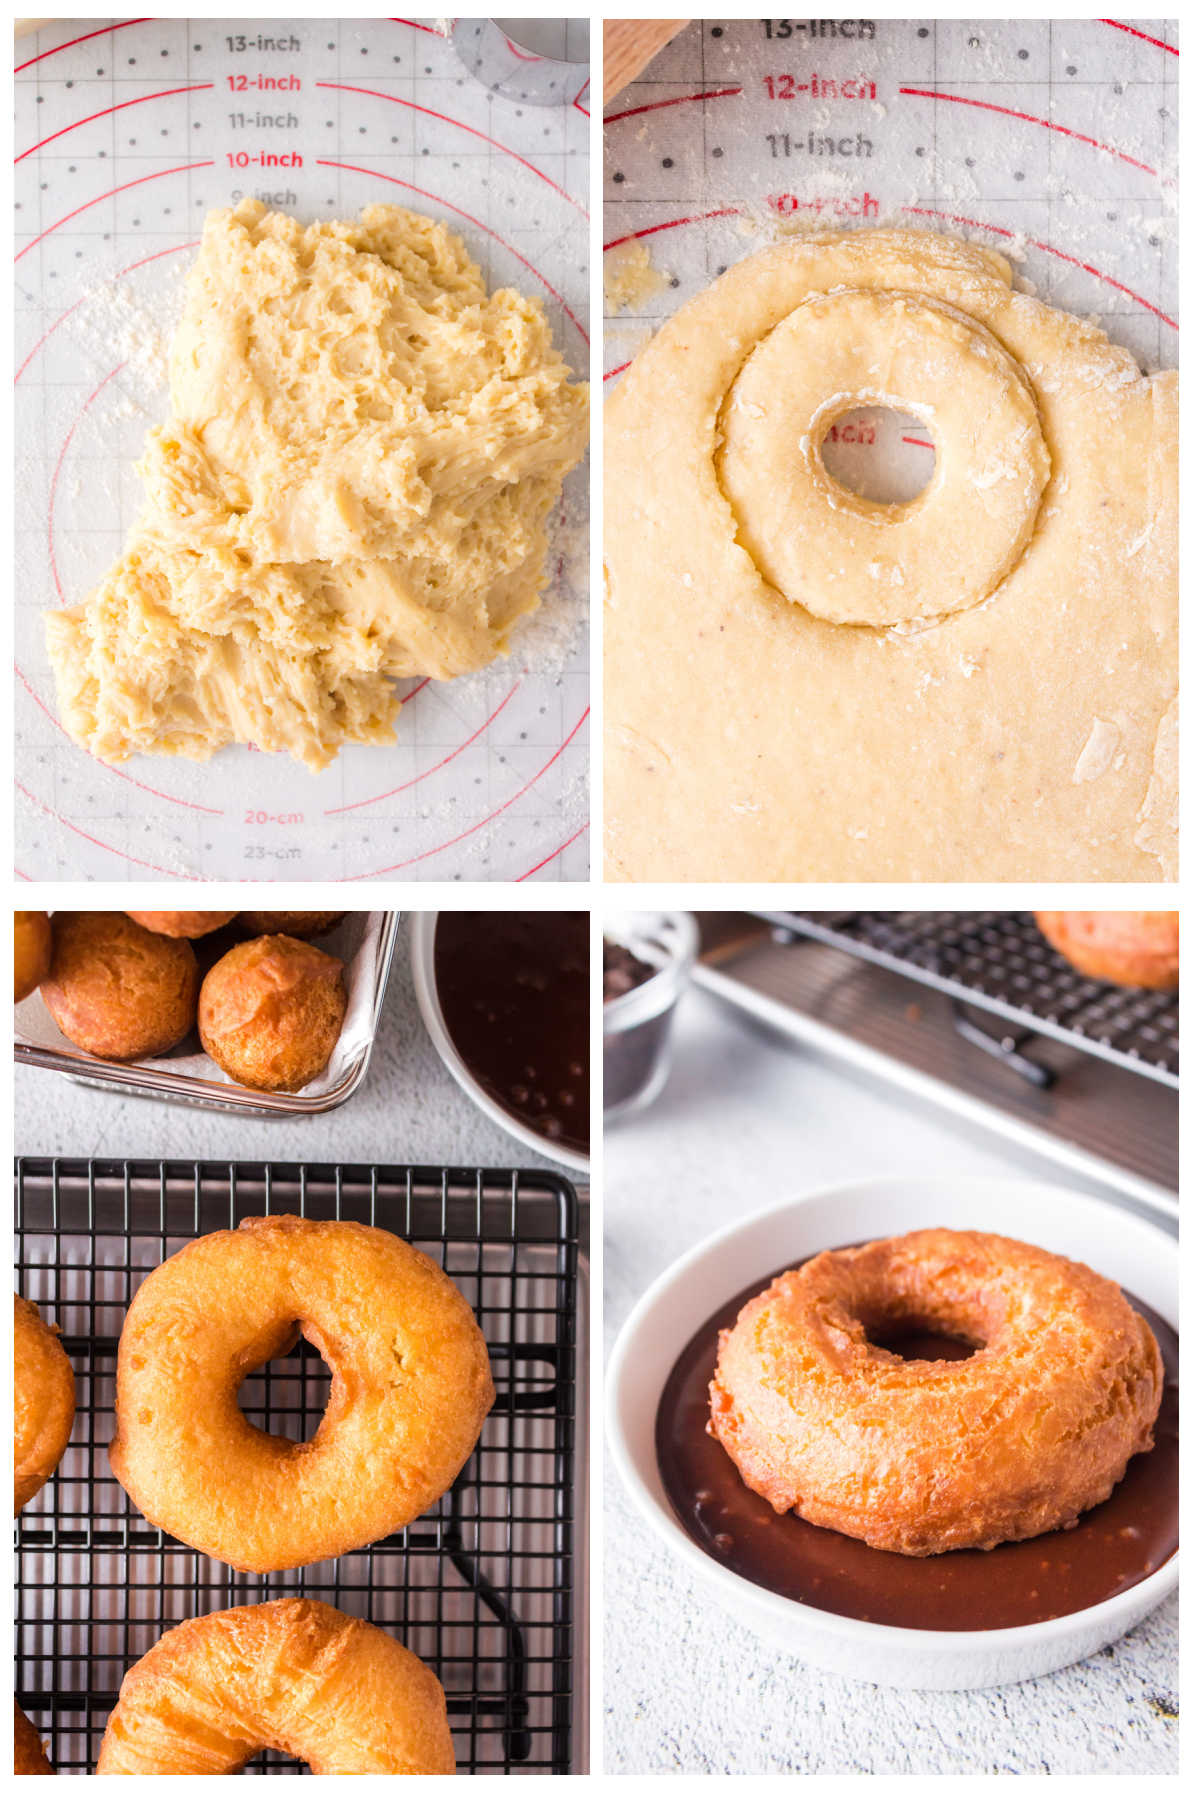 Step by step images showing how to cut and fry the donuts.